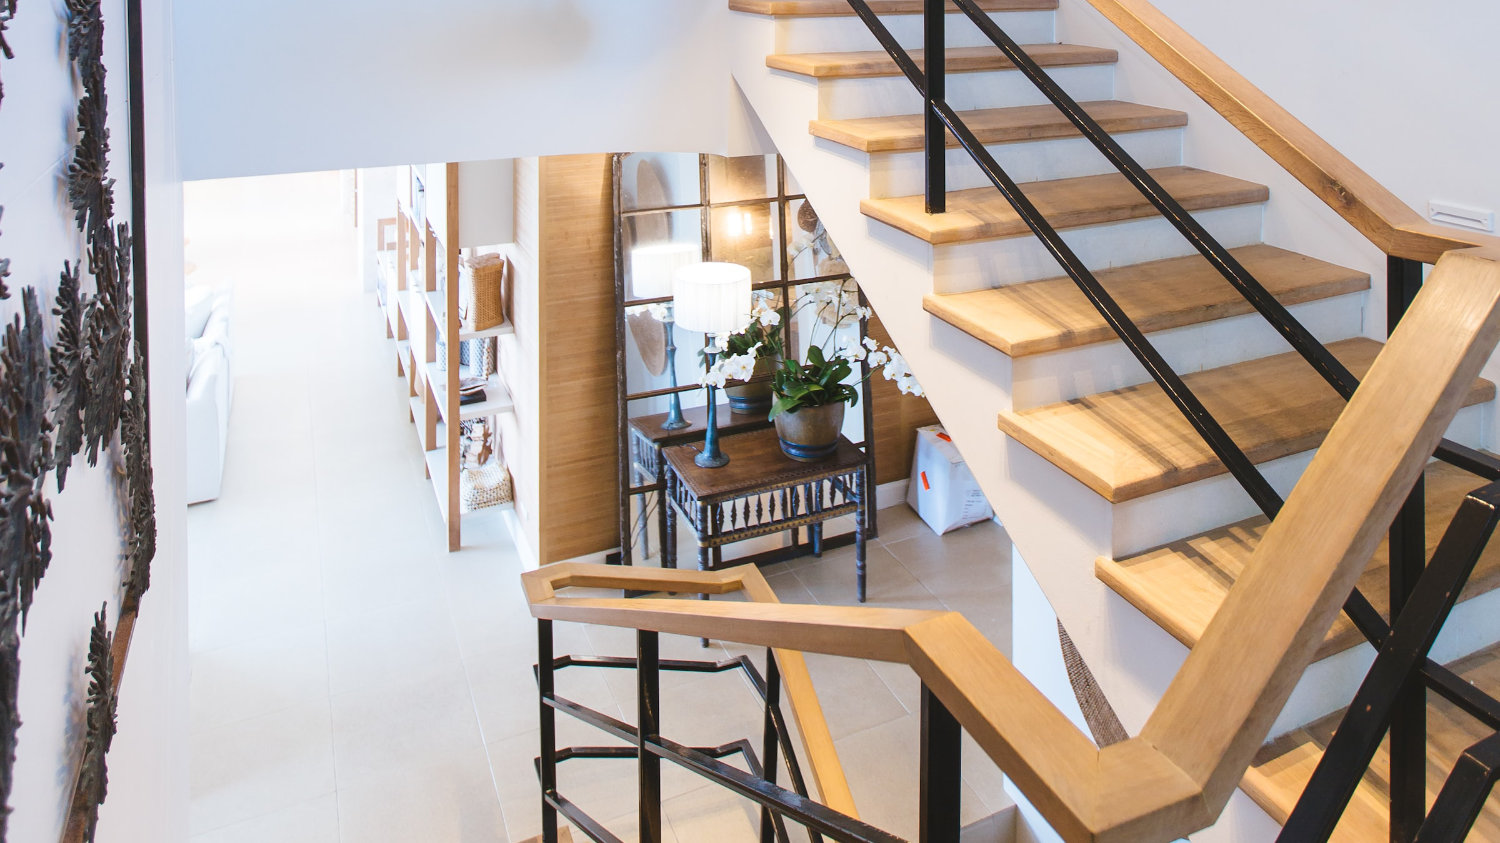 5 Stair Railing Ideas to Improve Your Home's Style